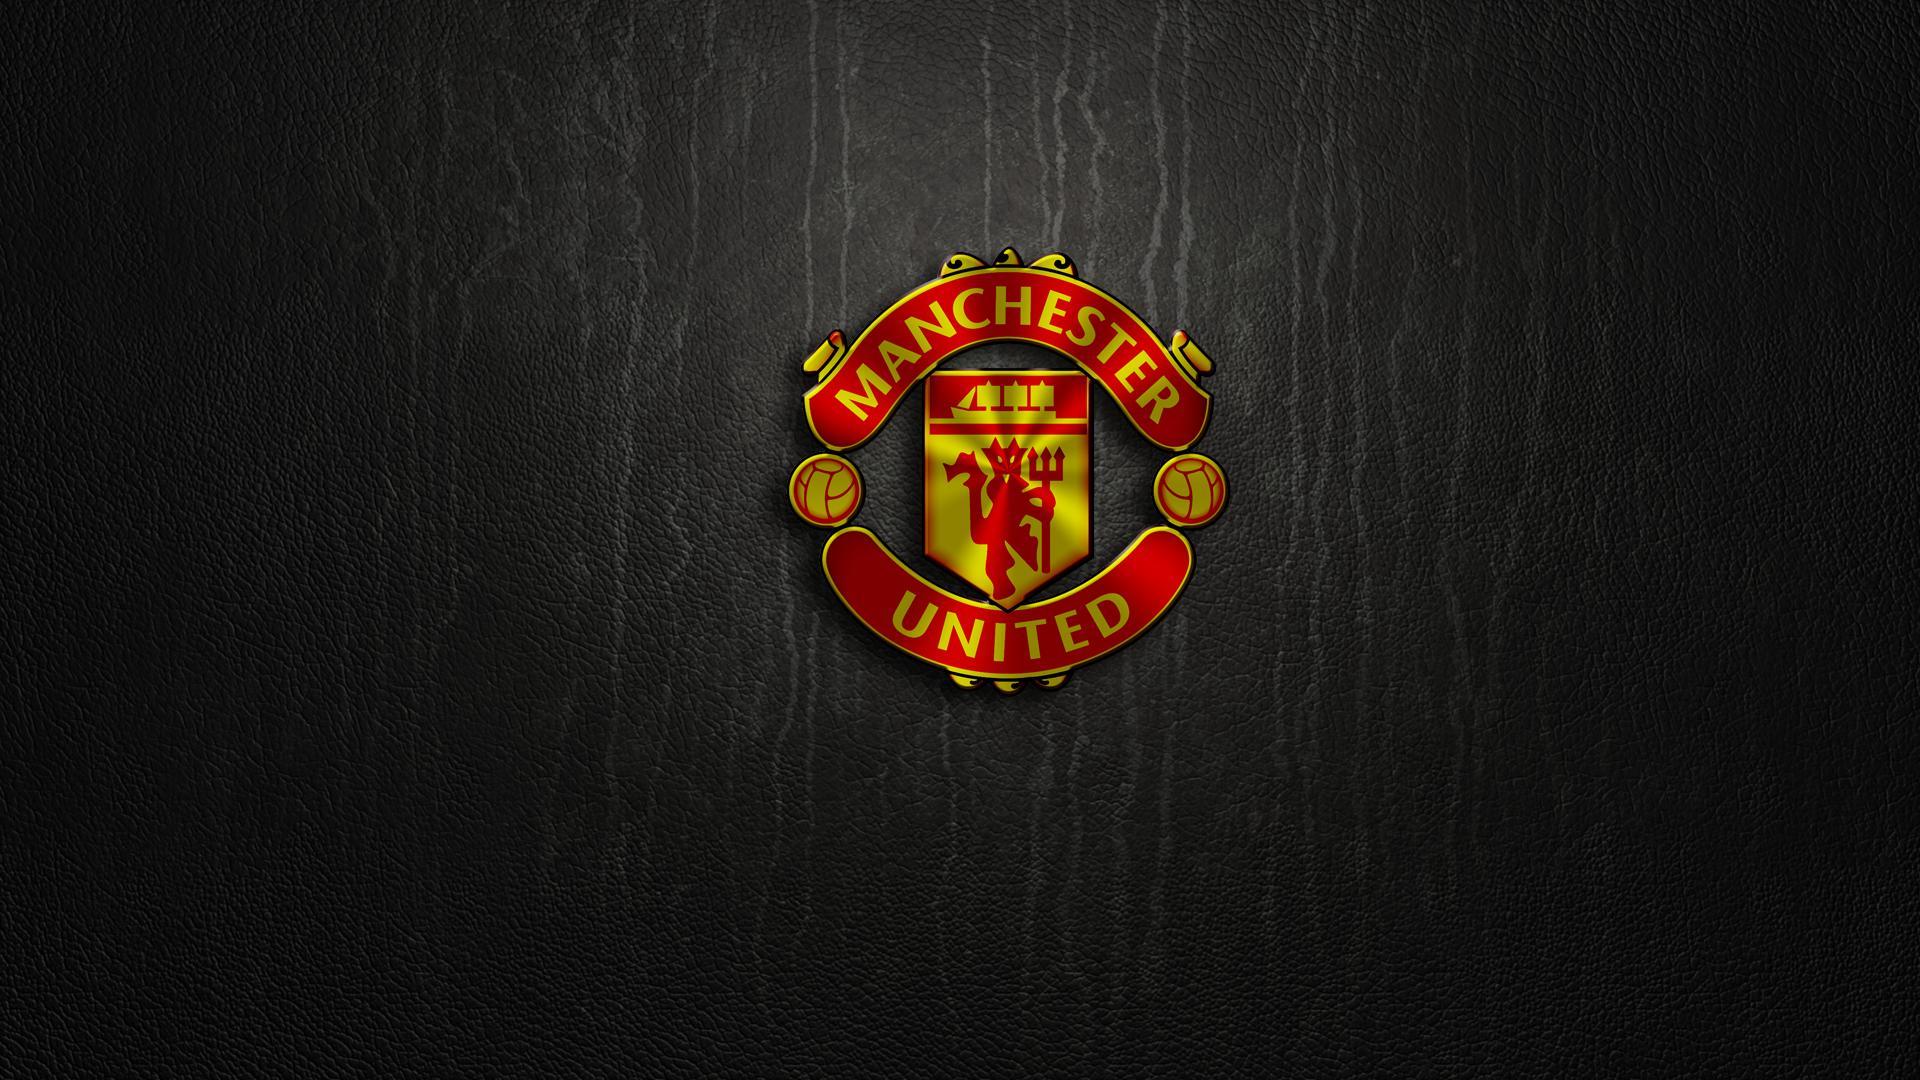 RES Wallpaper of Manchester United HD for PC & Mac, Laptop, Tablet